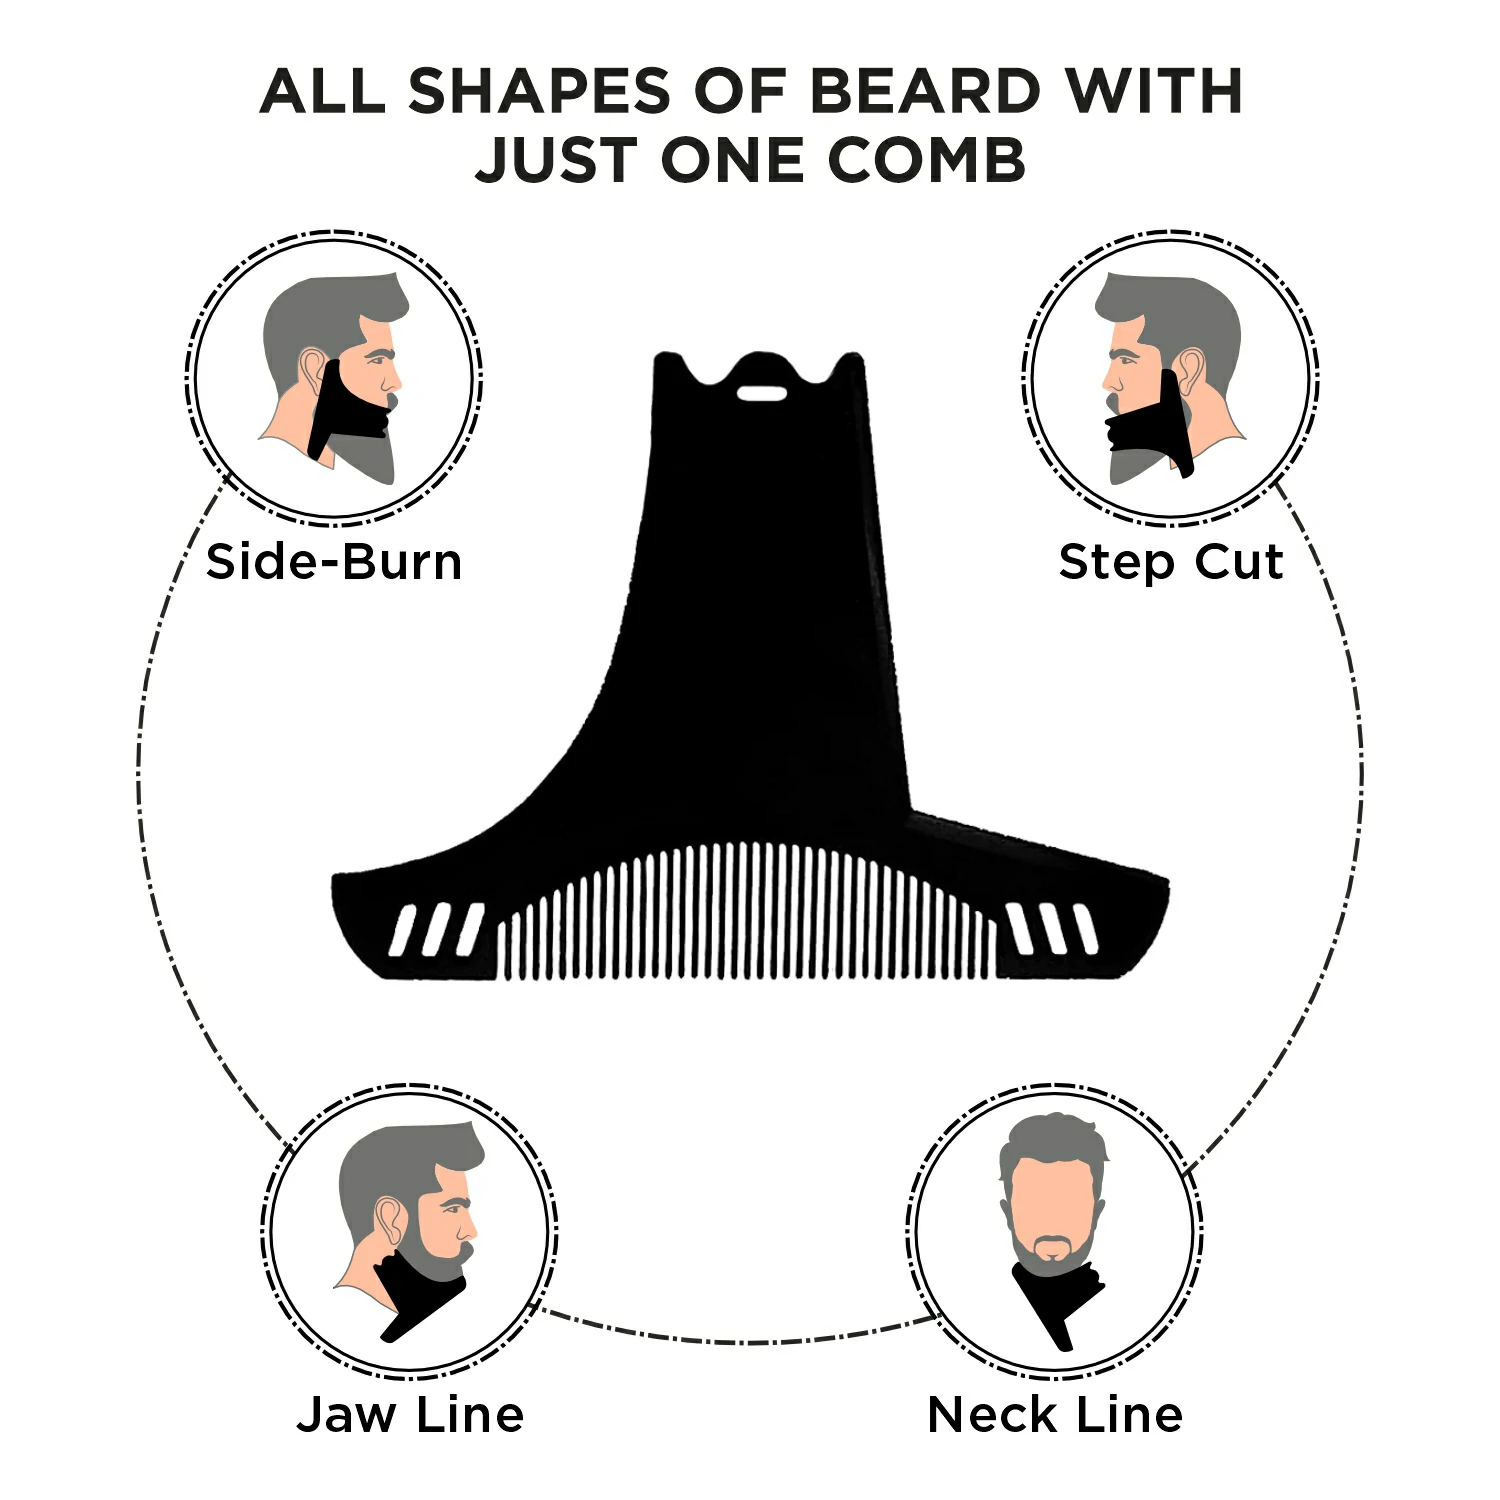 Beard Comb for all shapes